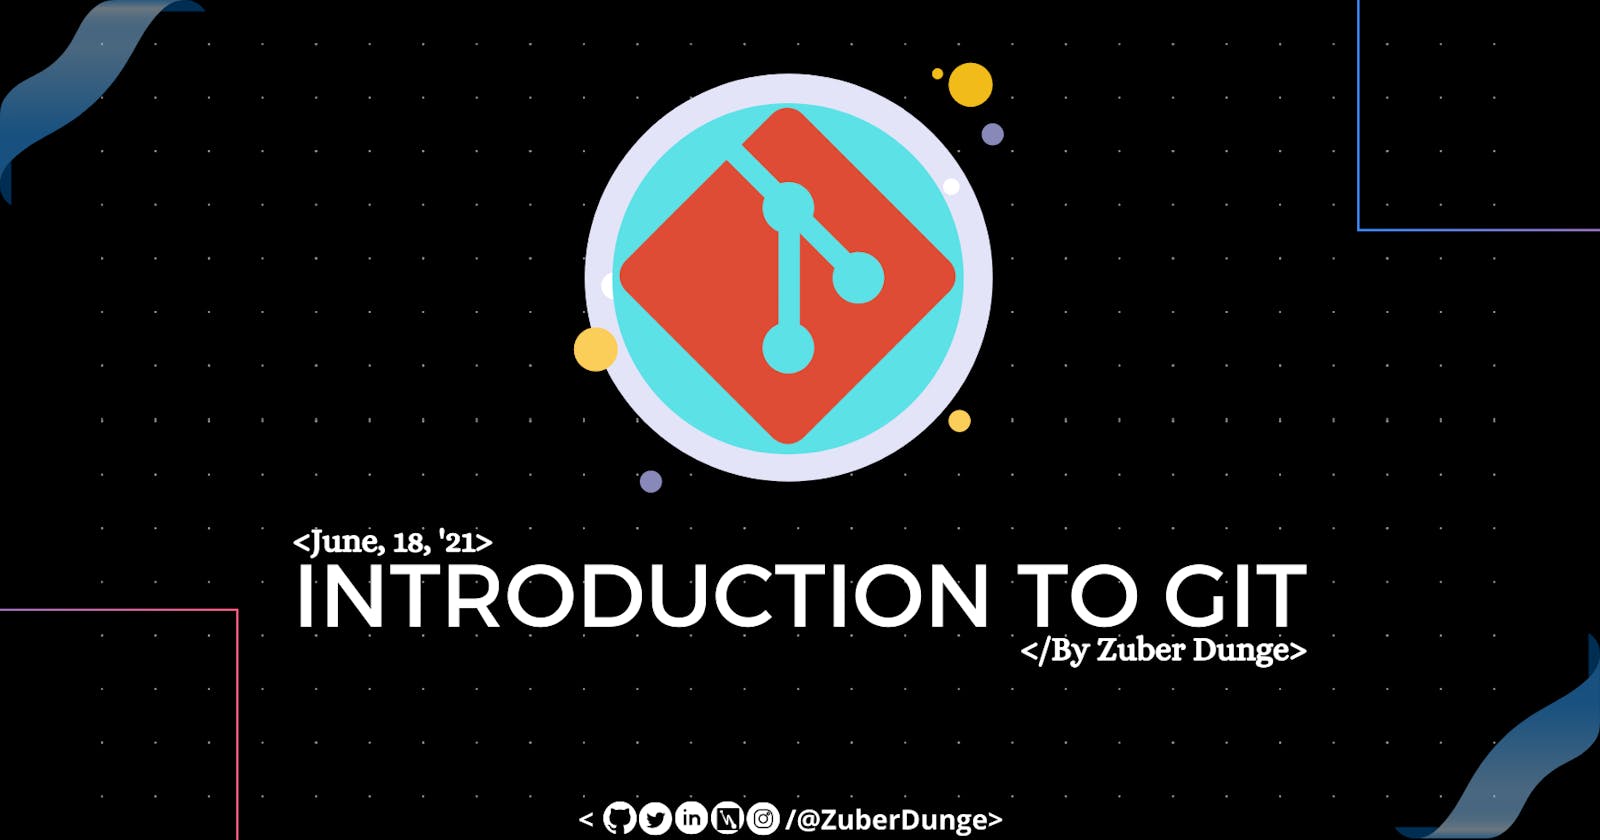 Introduction to Git!